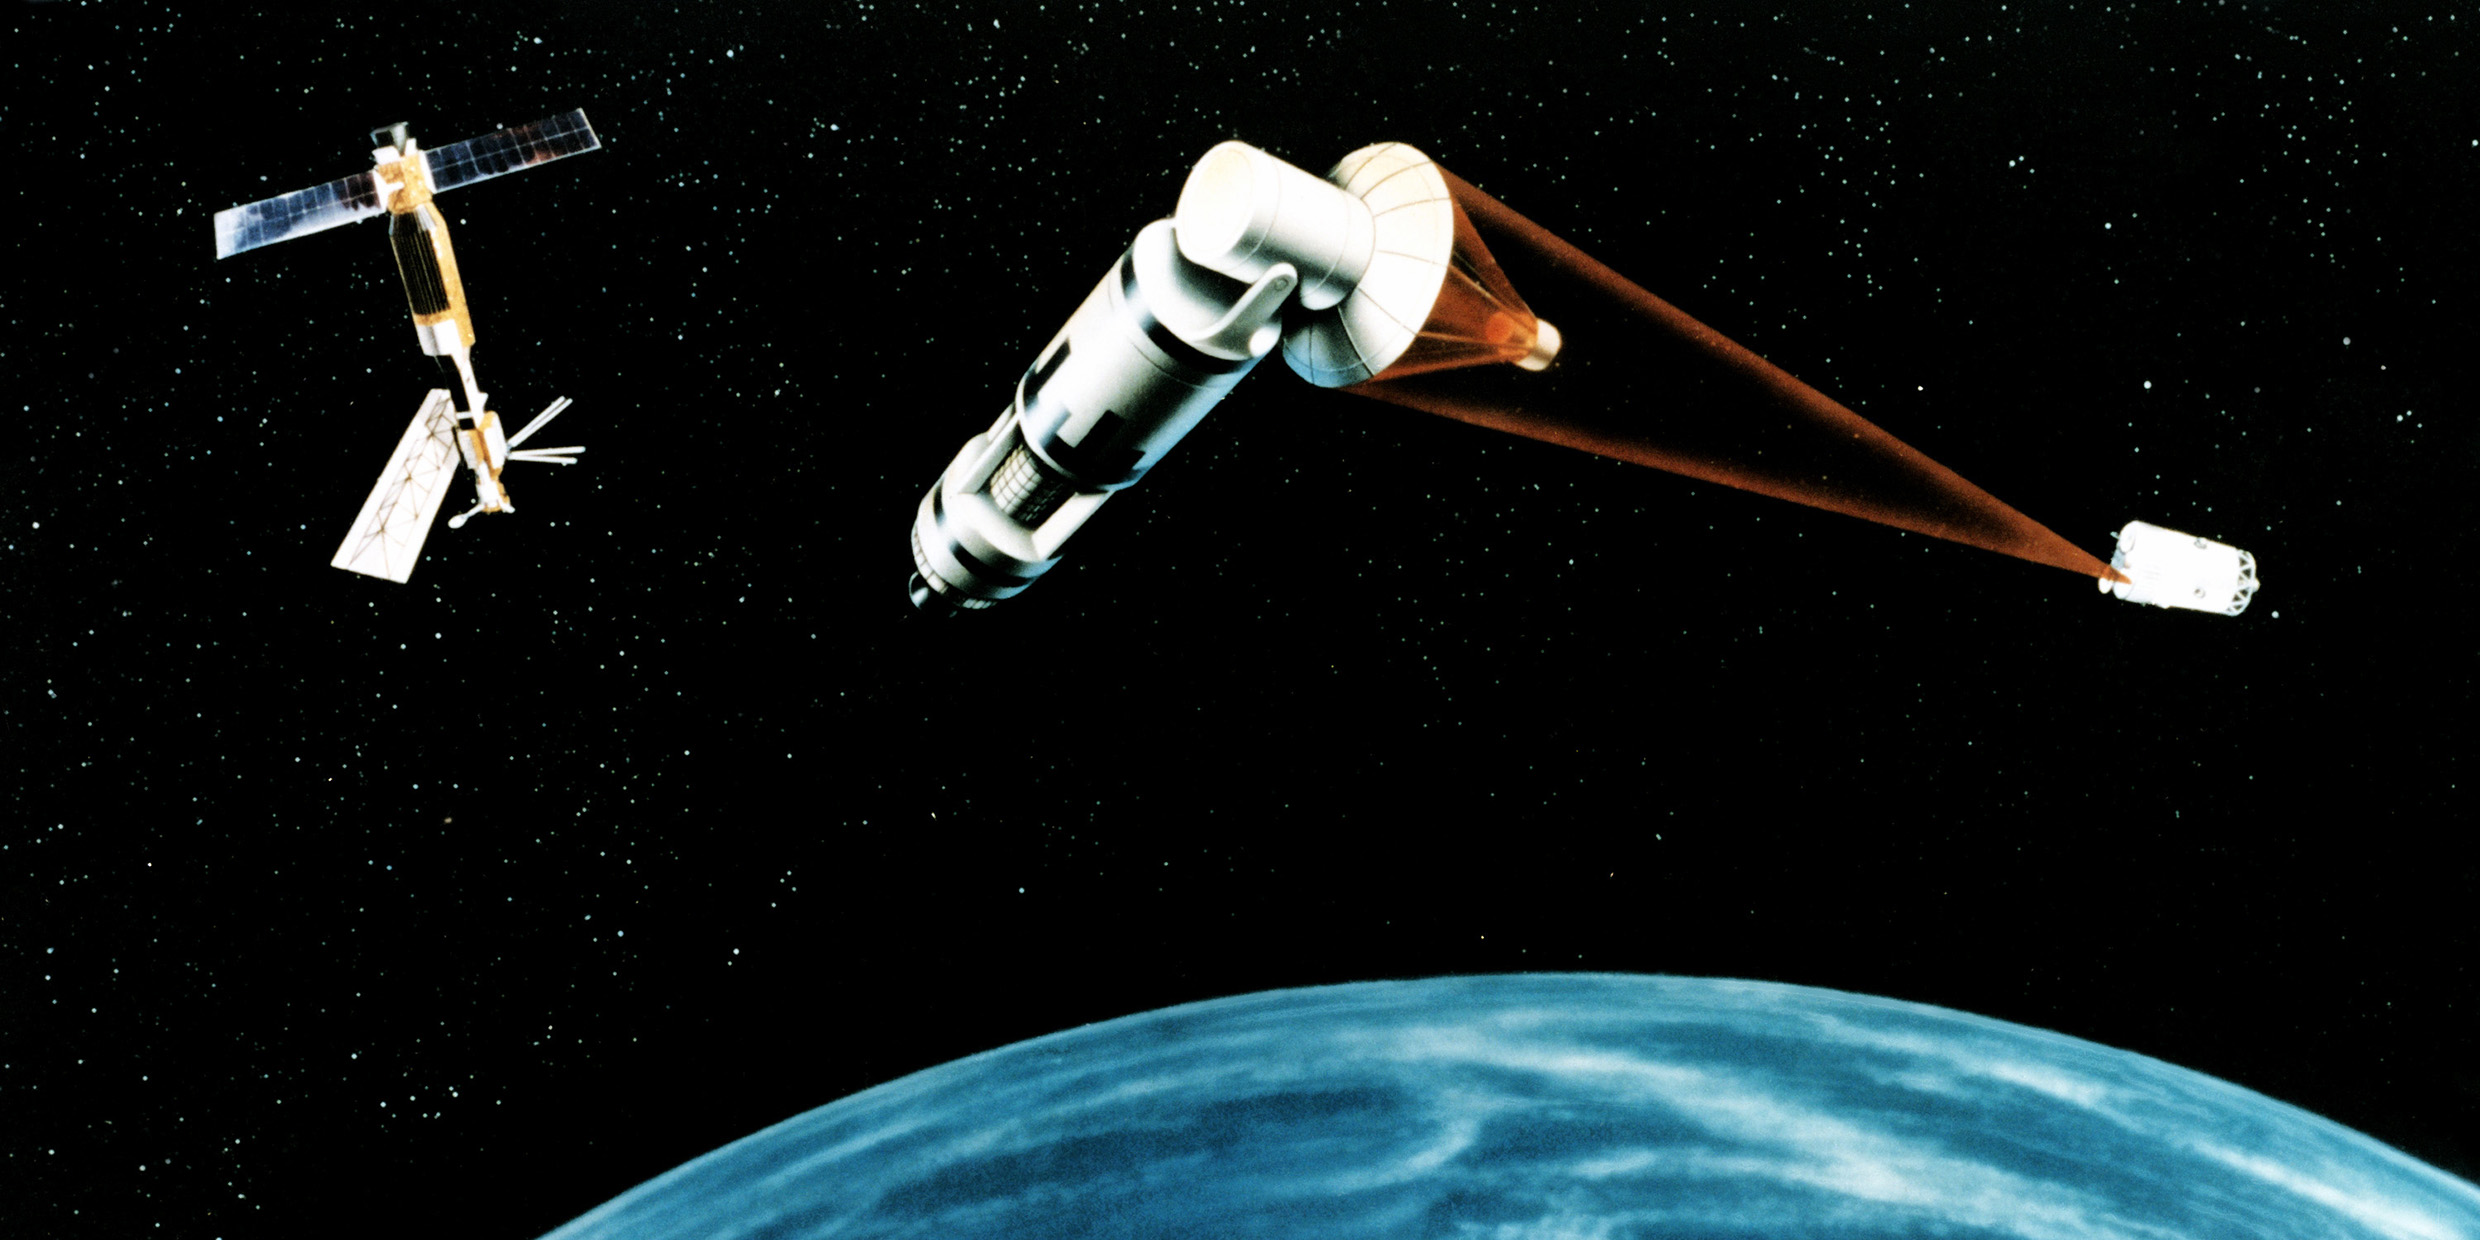 Artist's concept of space laser